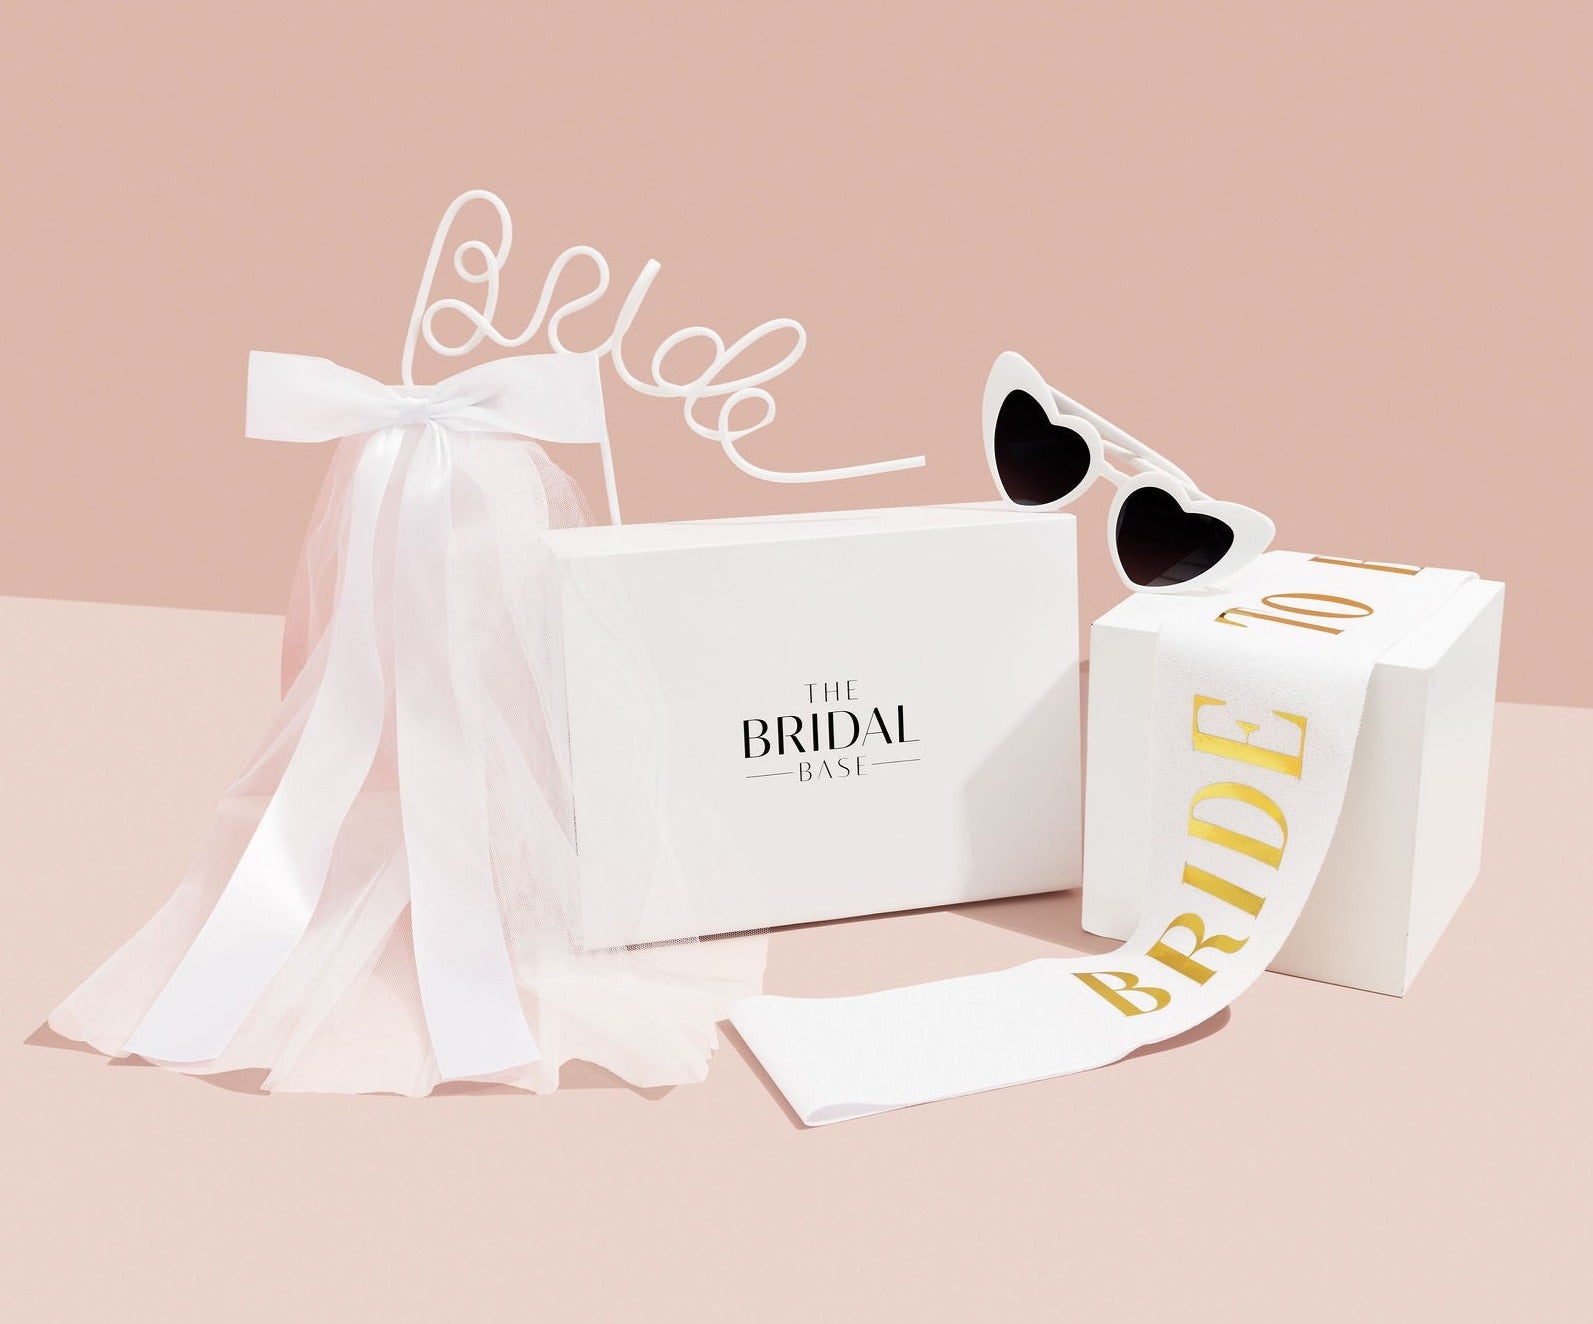 The Bottomless Brunch hens accessory gift box